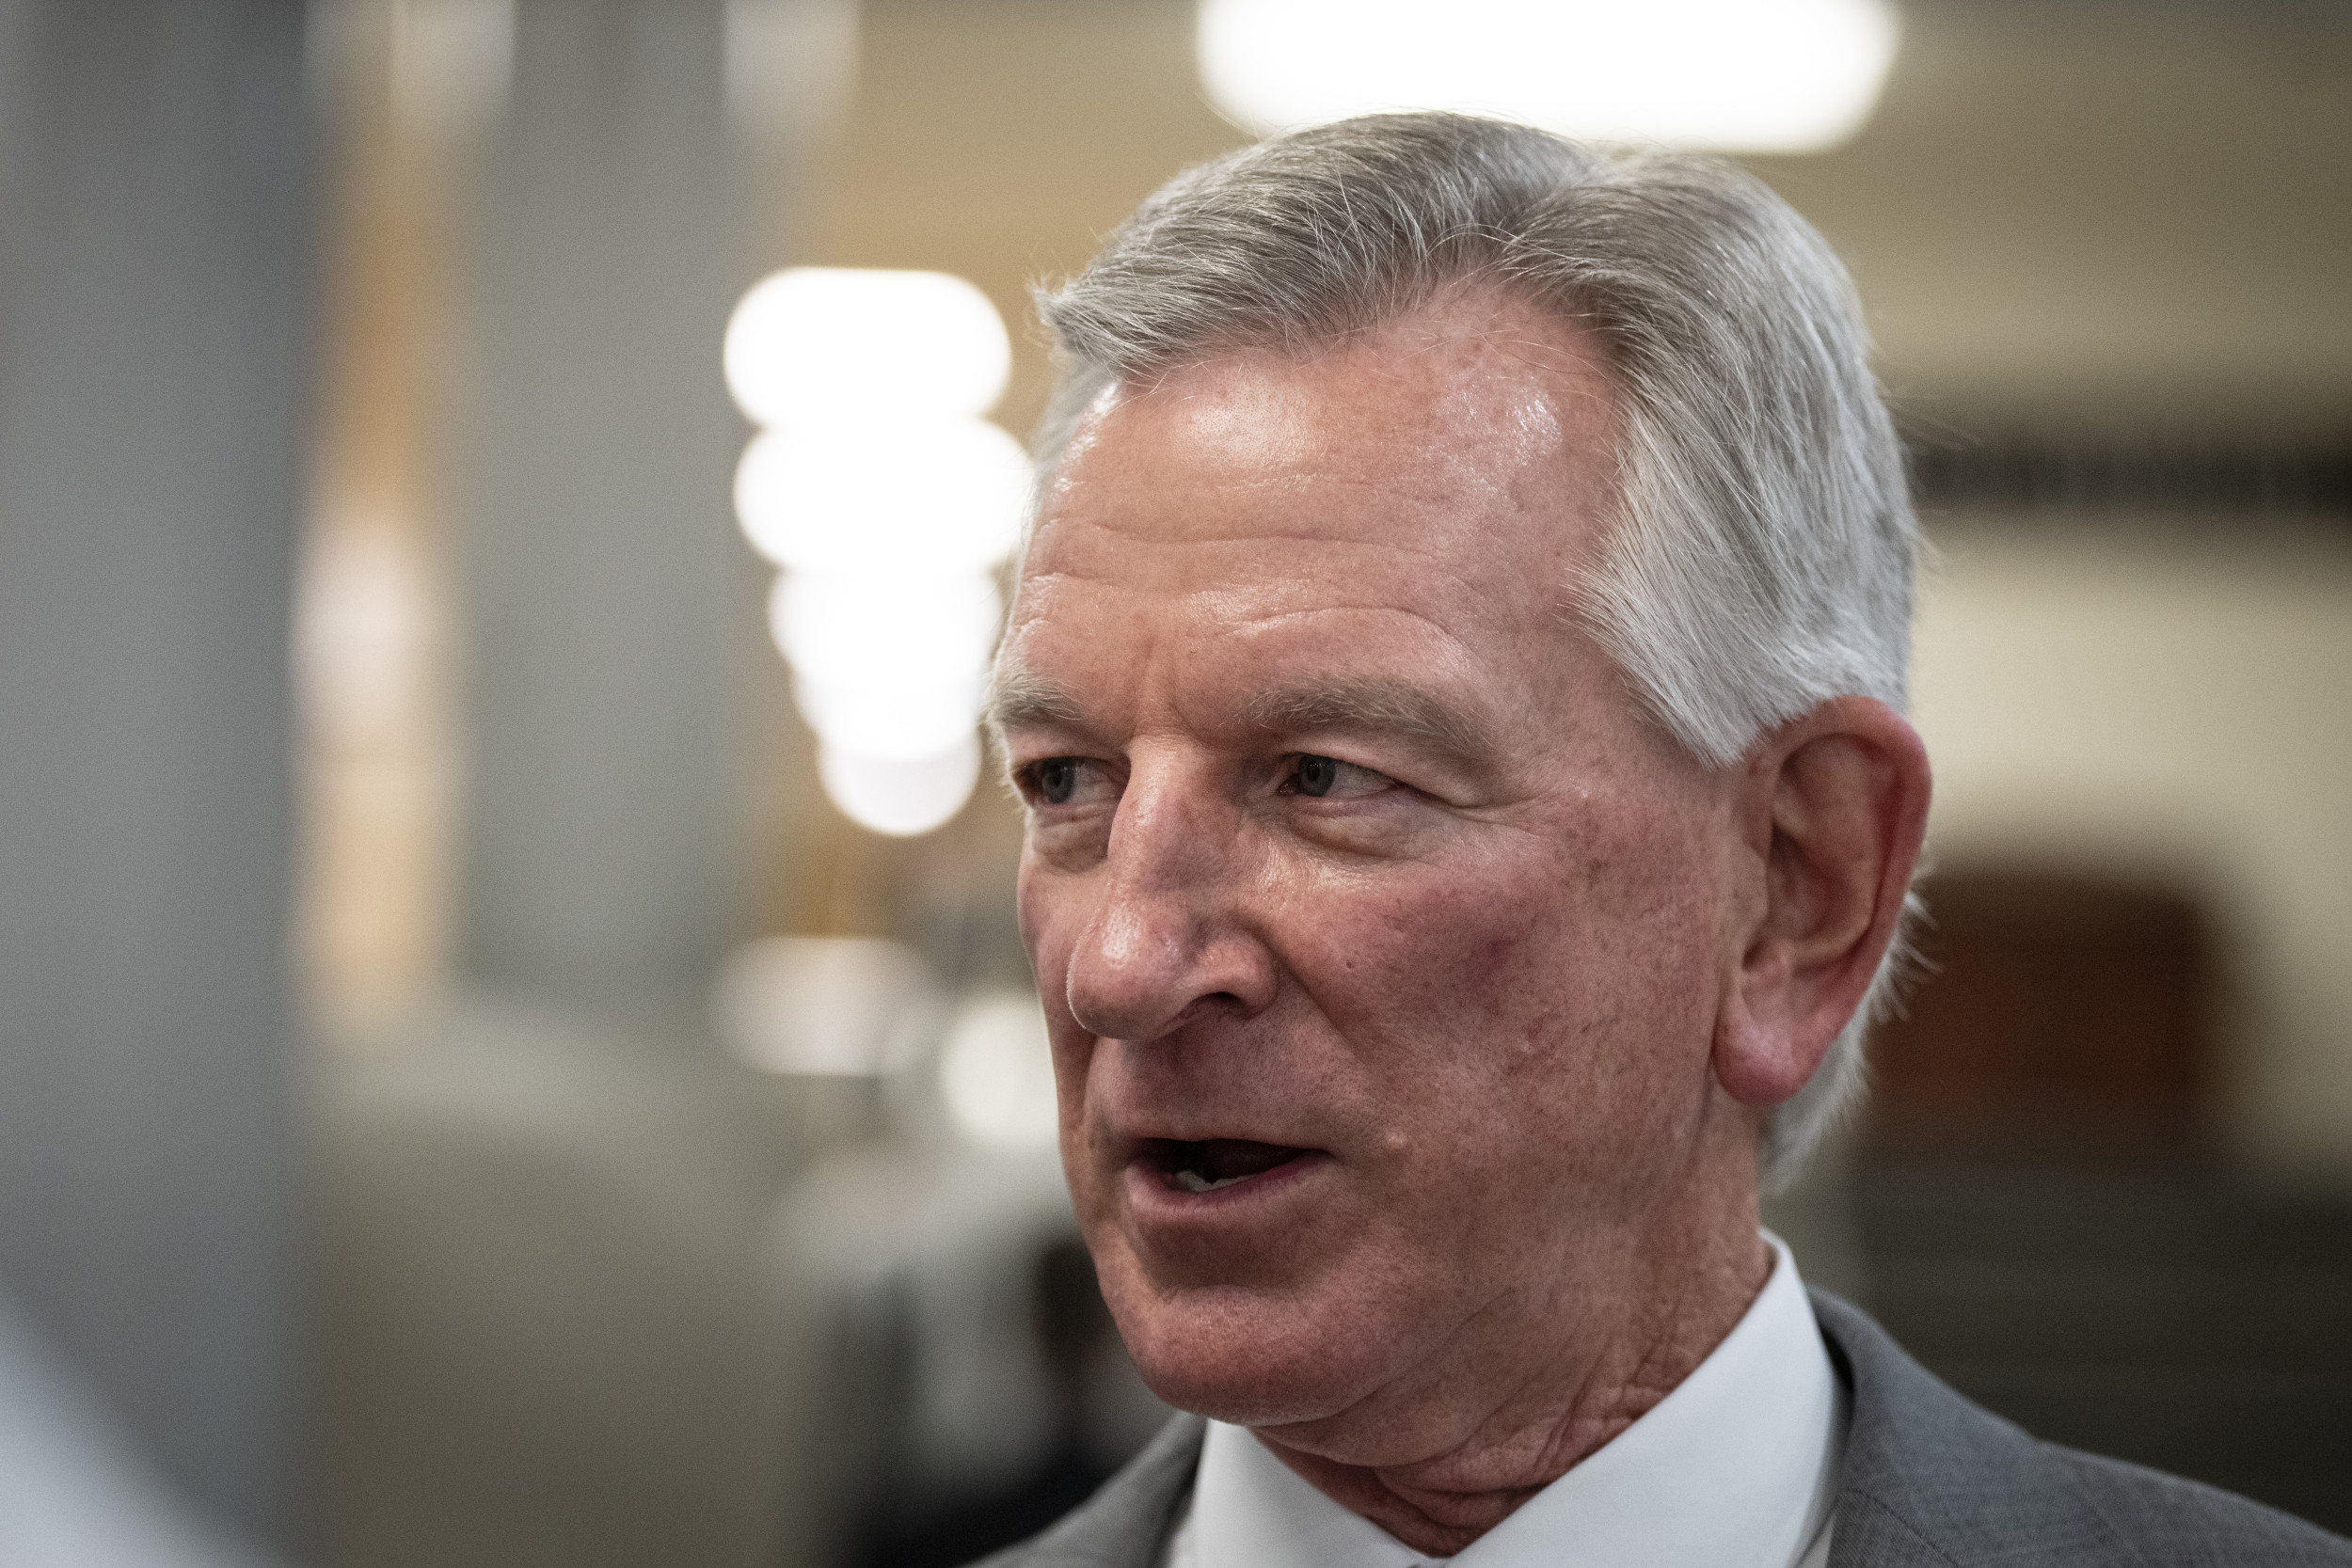 Tommy Tuberville Says the Definition of White Nationalism Is an ‘Opinion’ (newsweek.com)